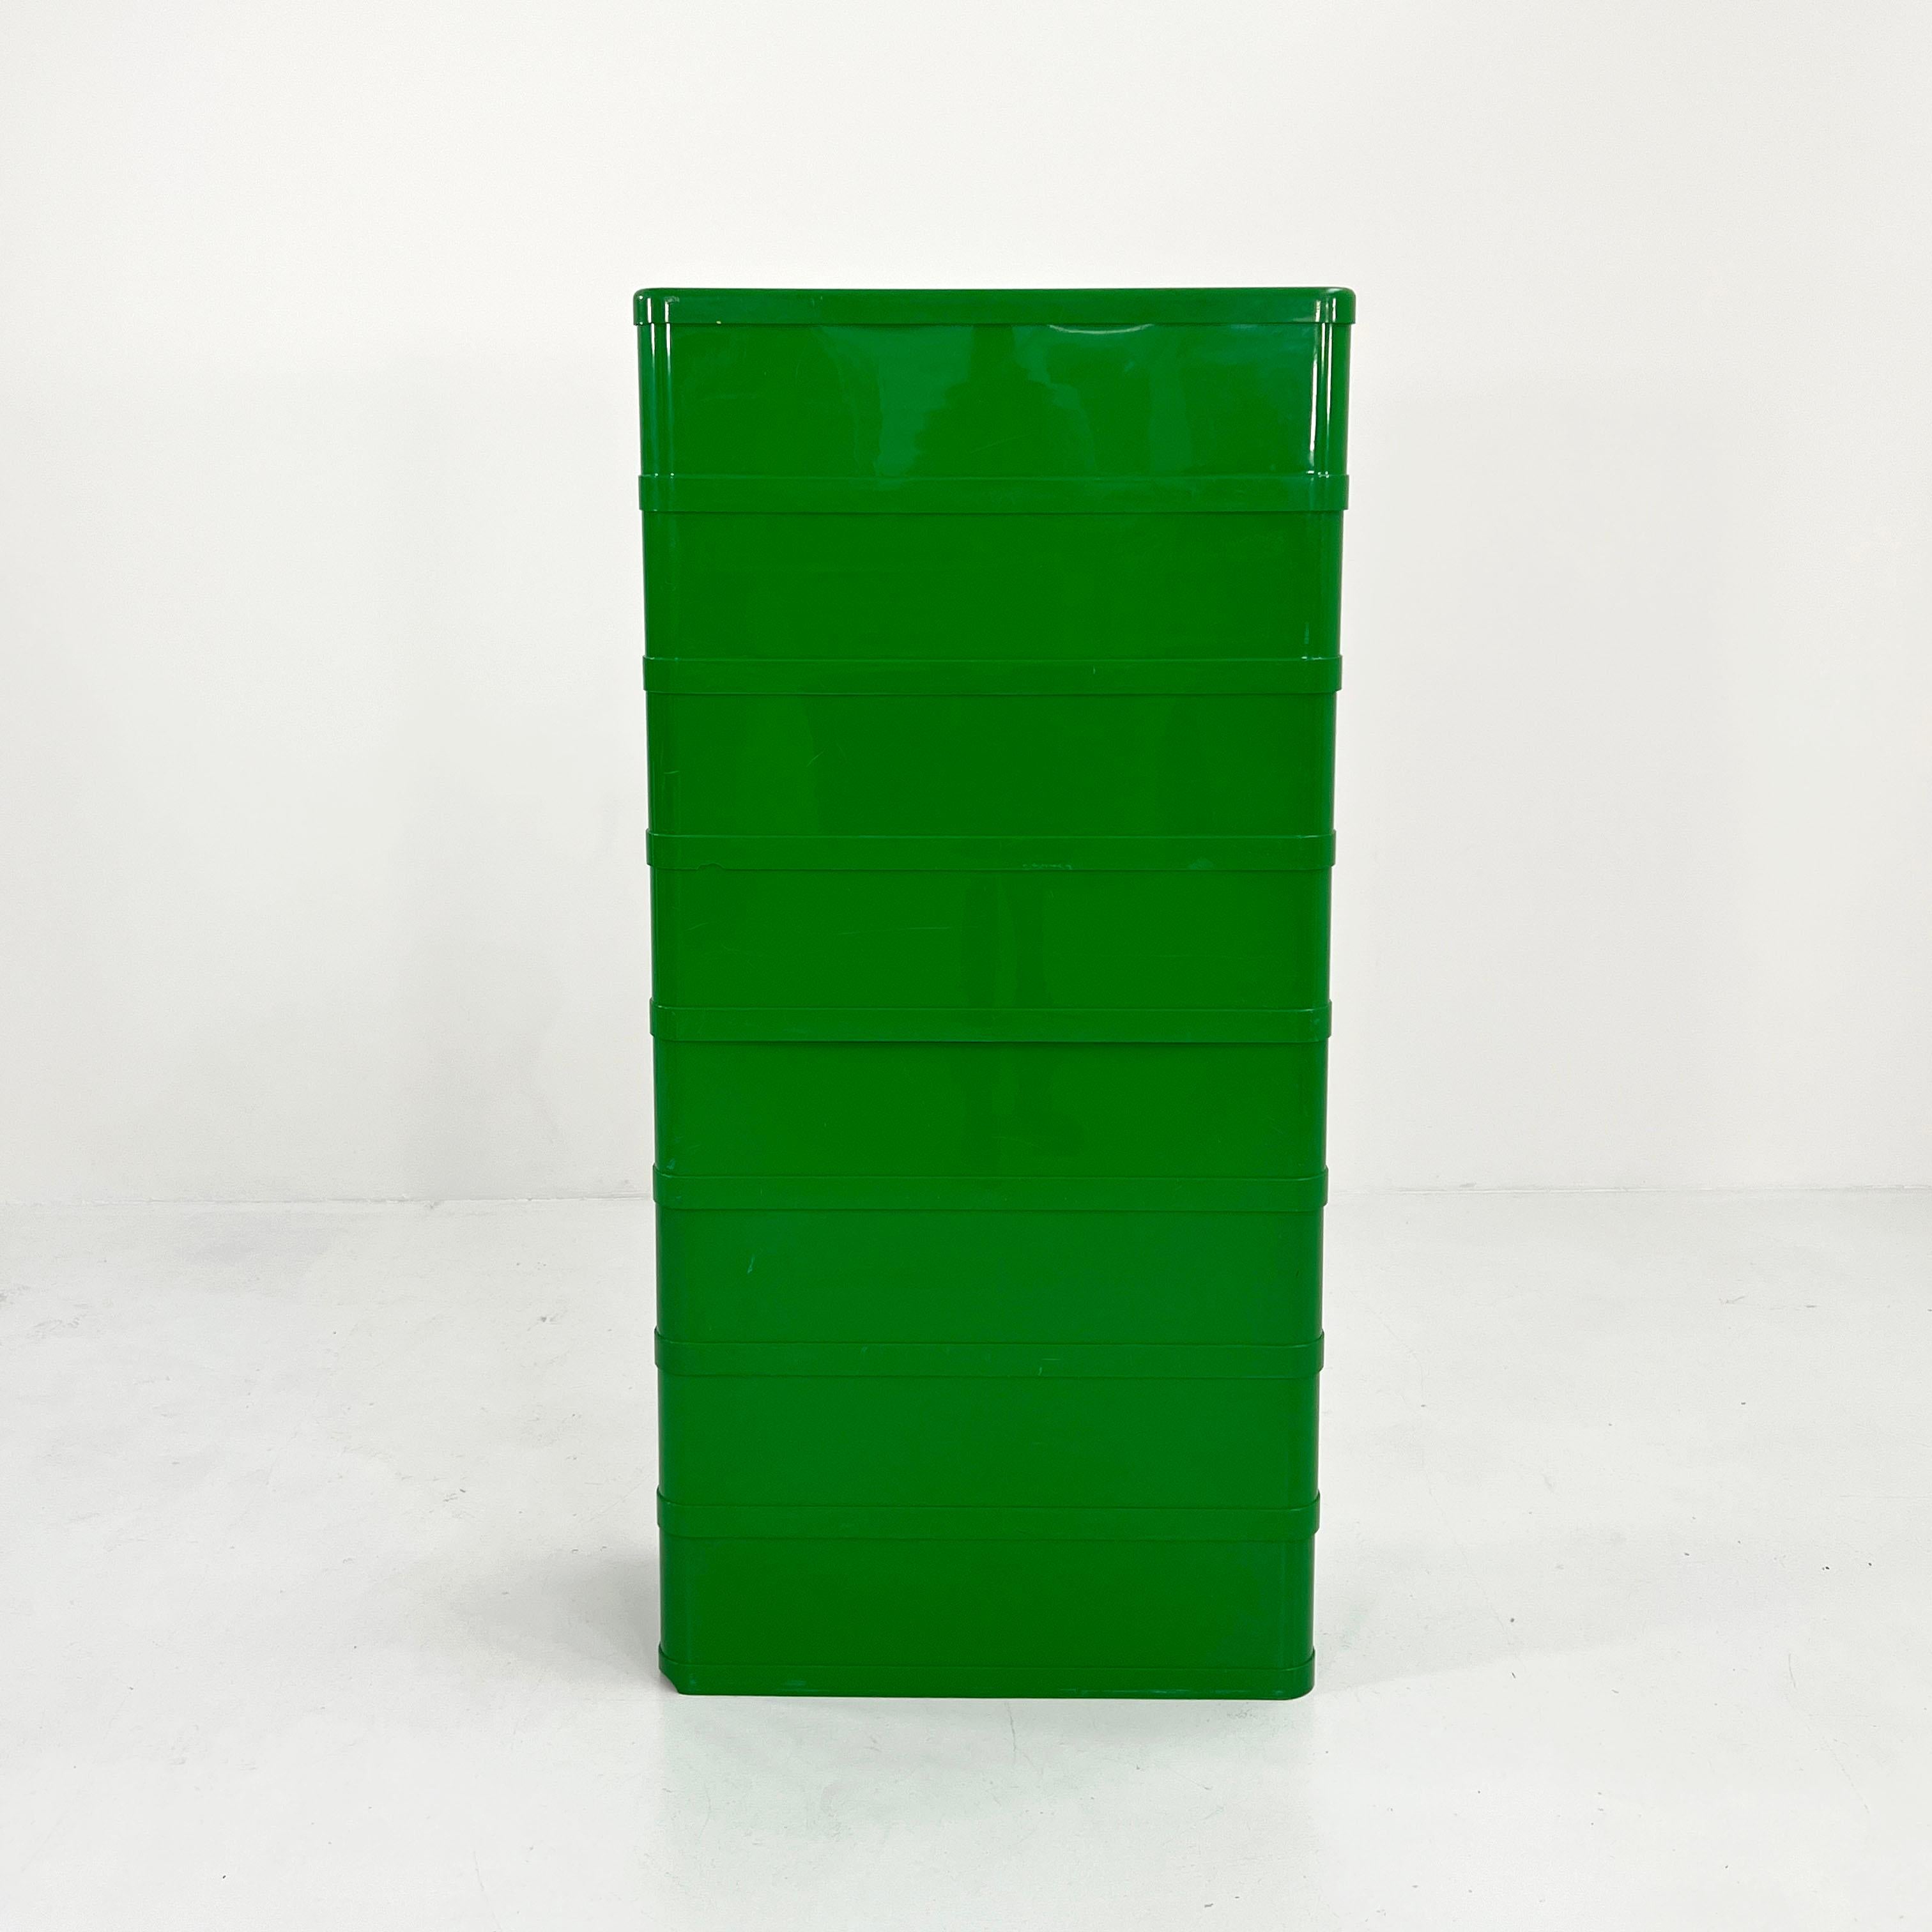 Plastic Green Chest of Drawers Model “4964” by Olaf von Bohr for Kartell, 1970s